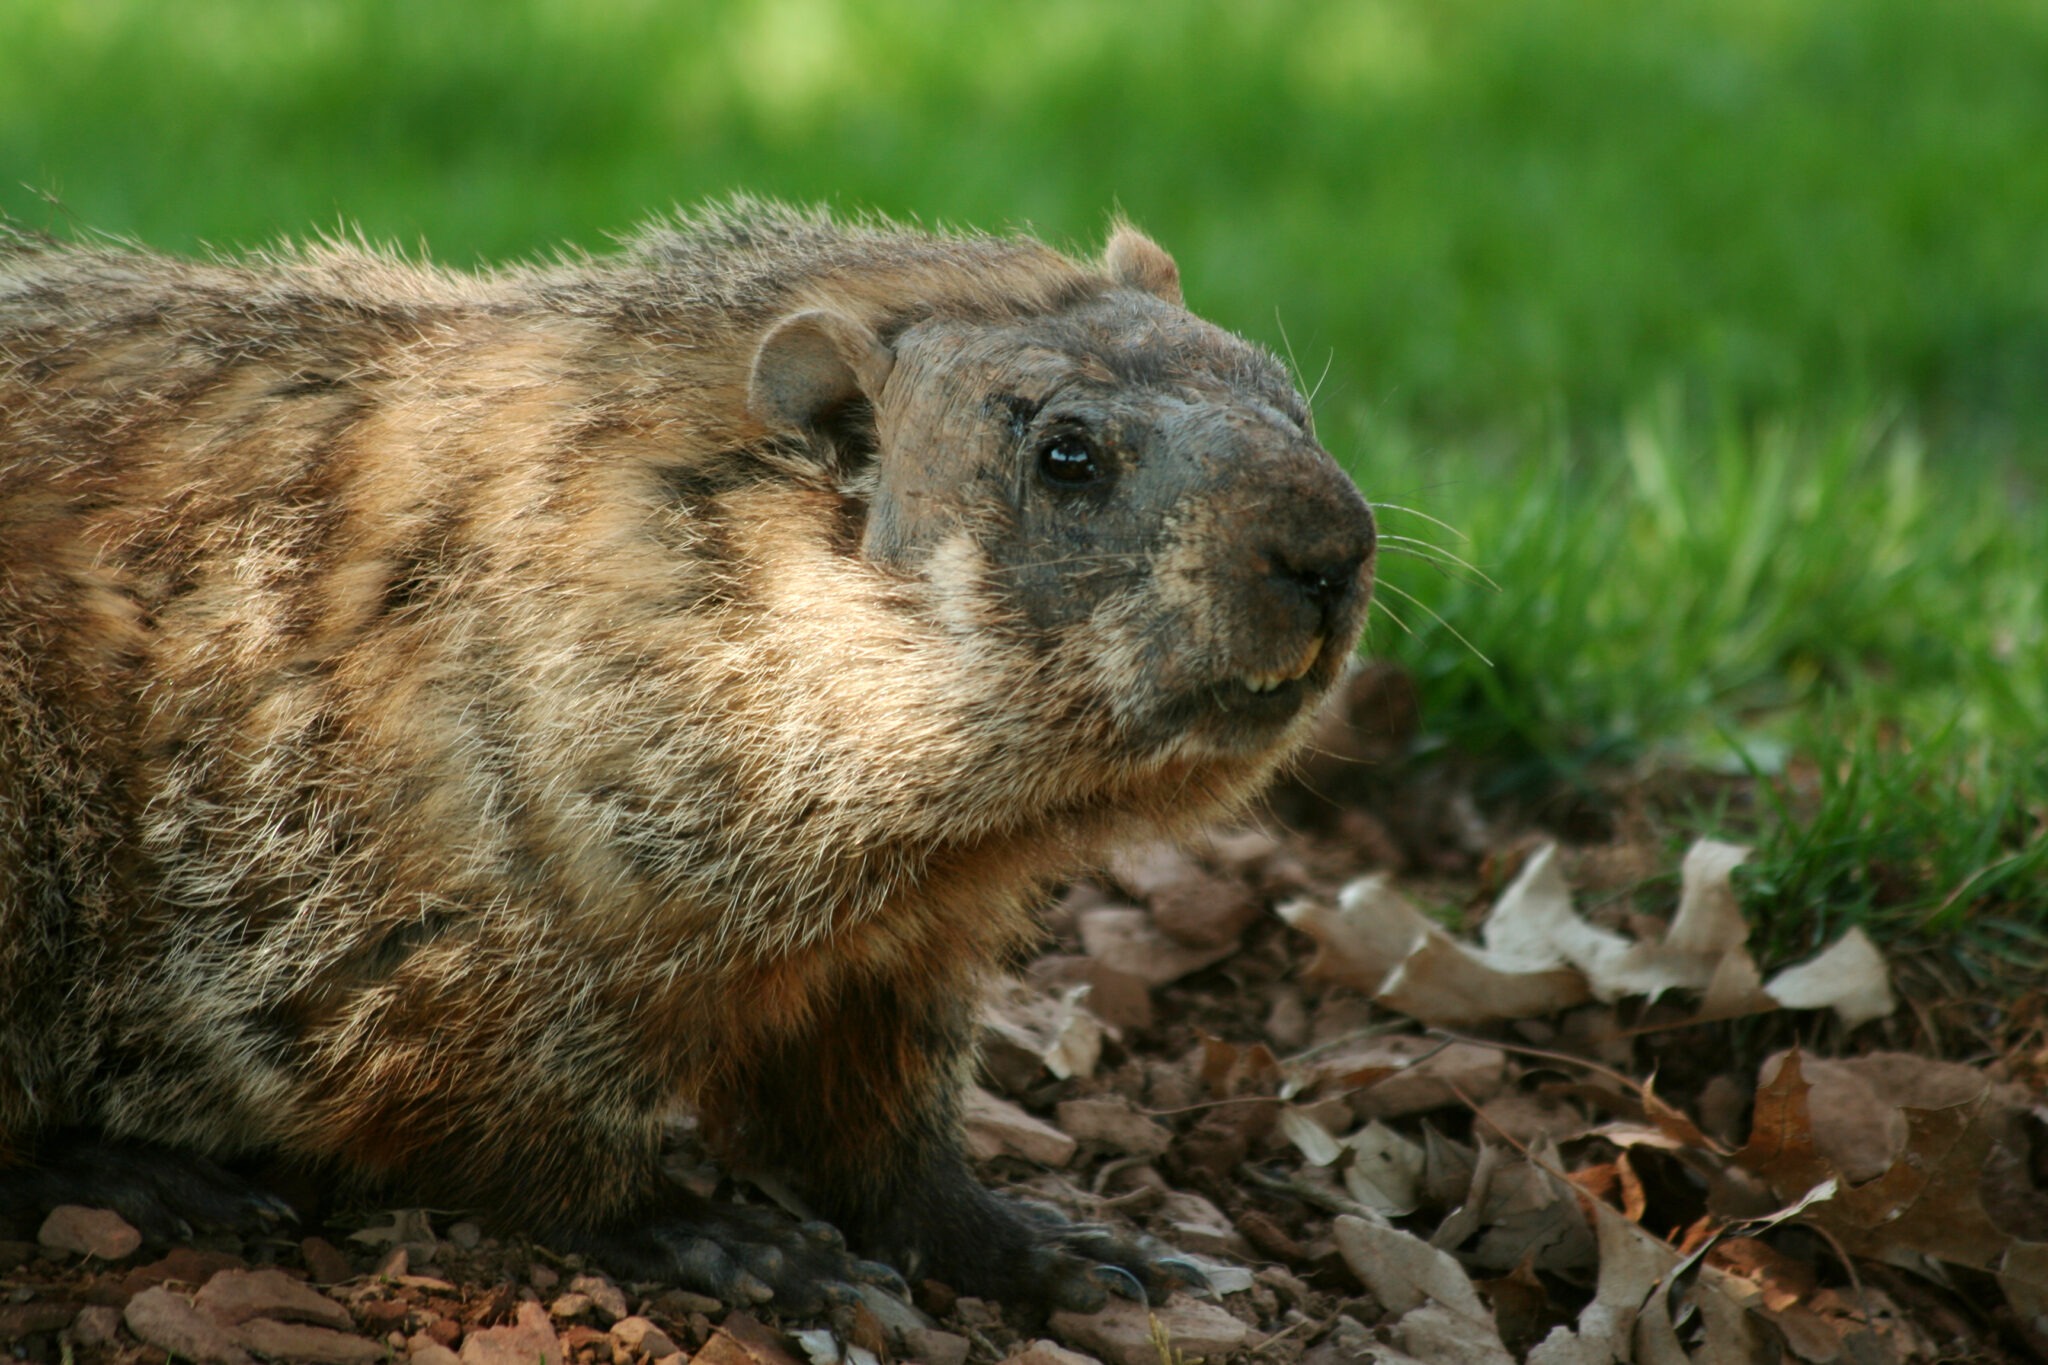 How Long Has Ground Hog Day Been Around?